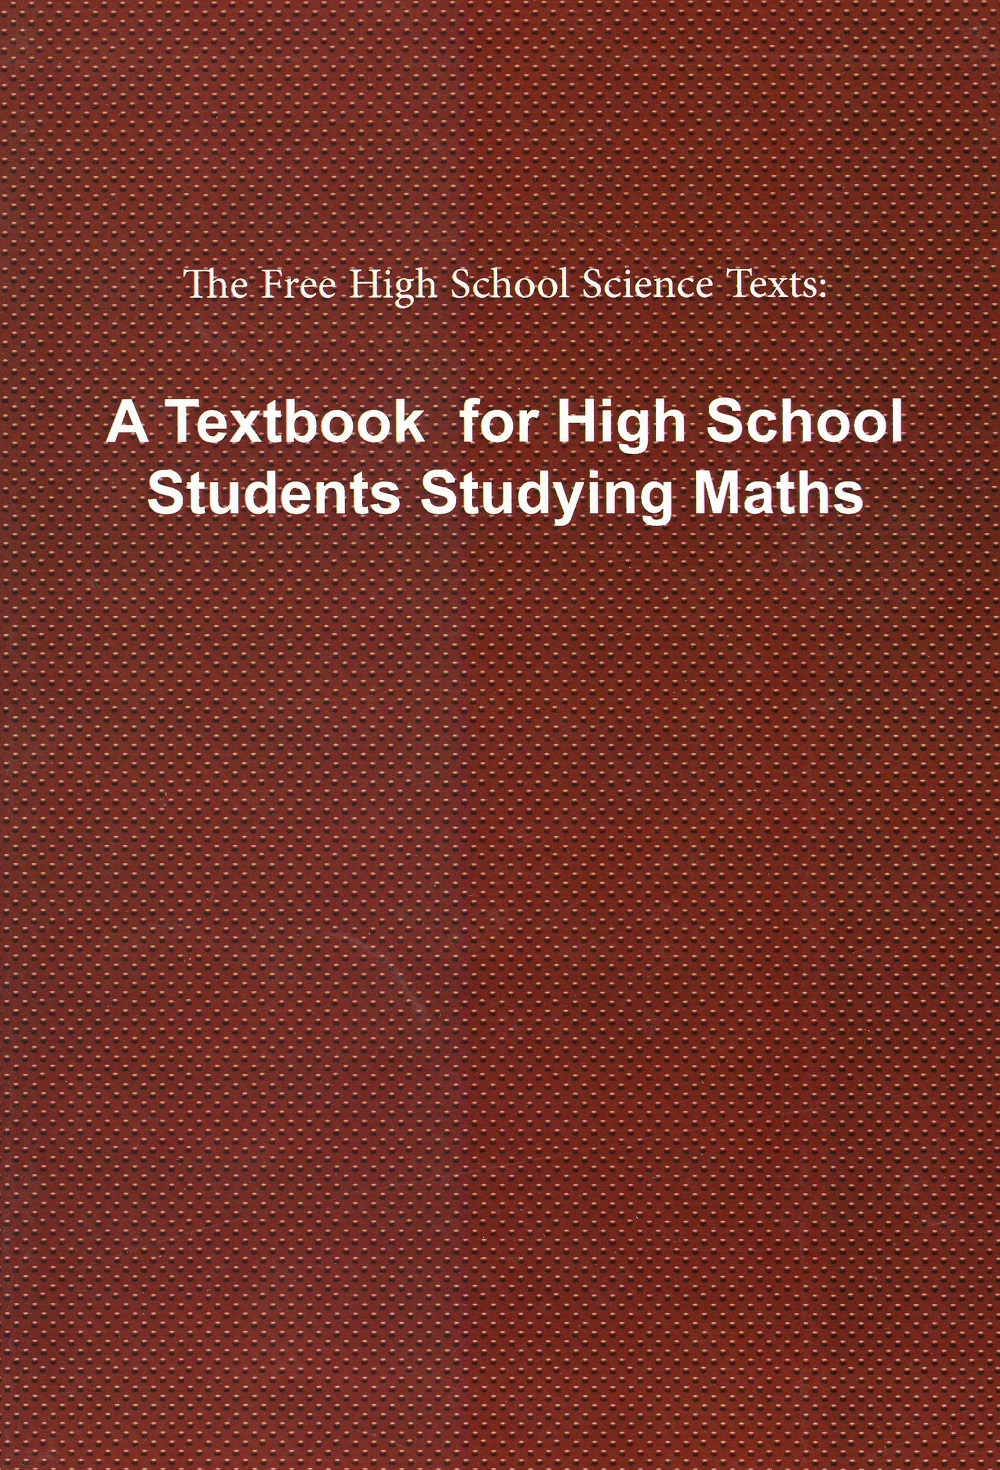 A Textbook for High School Students Studing Maths